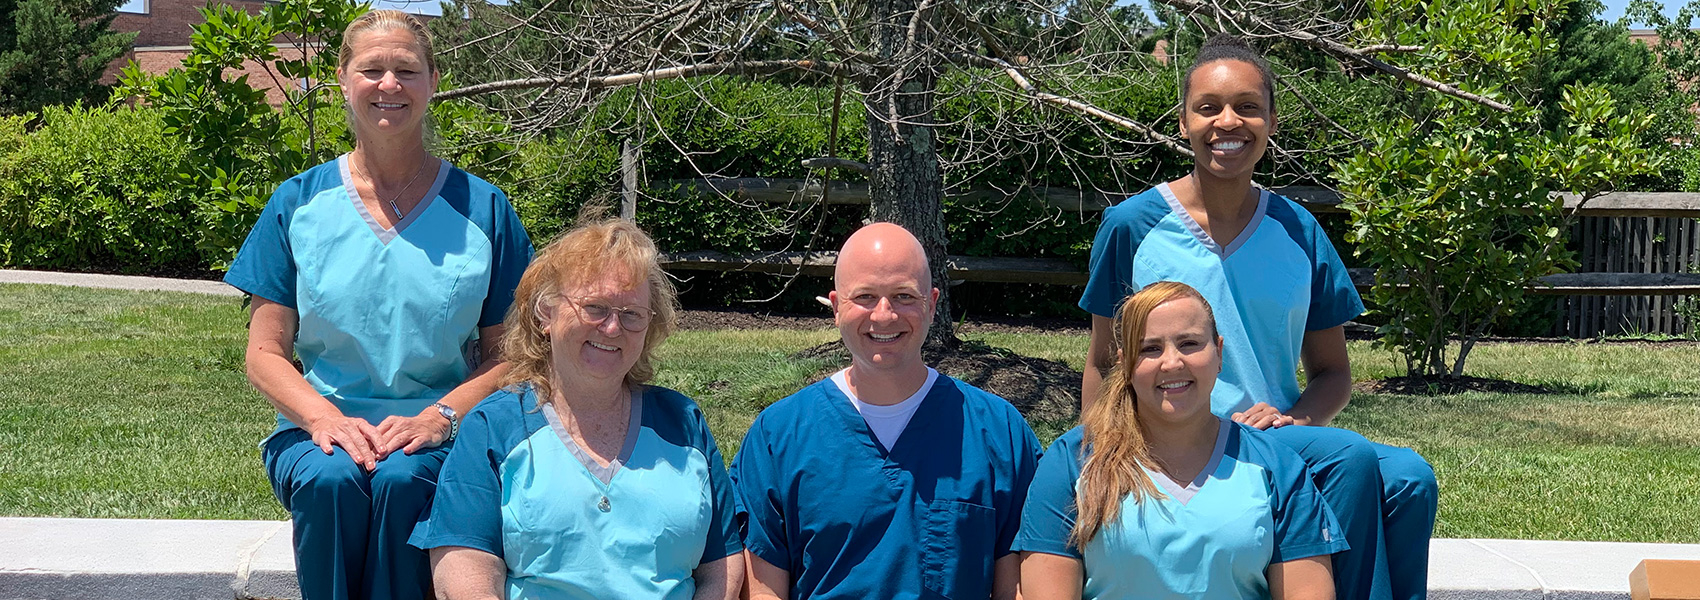 Meet the Team at Piney Orchard Dental